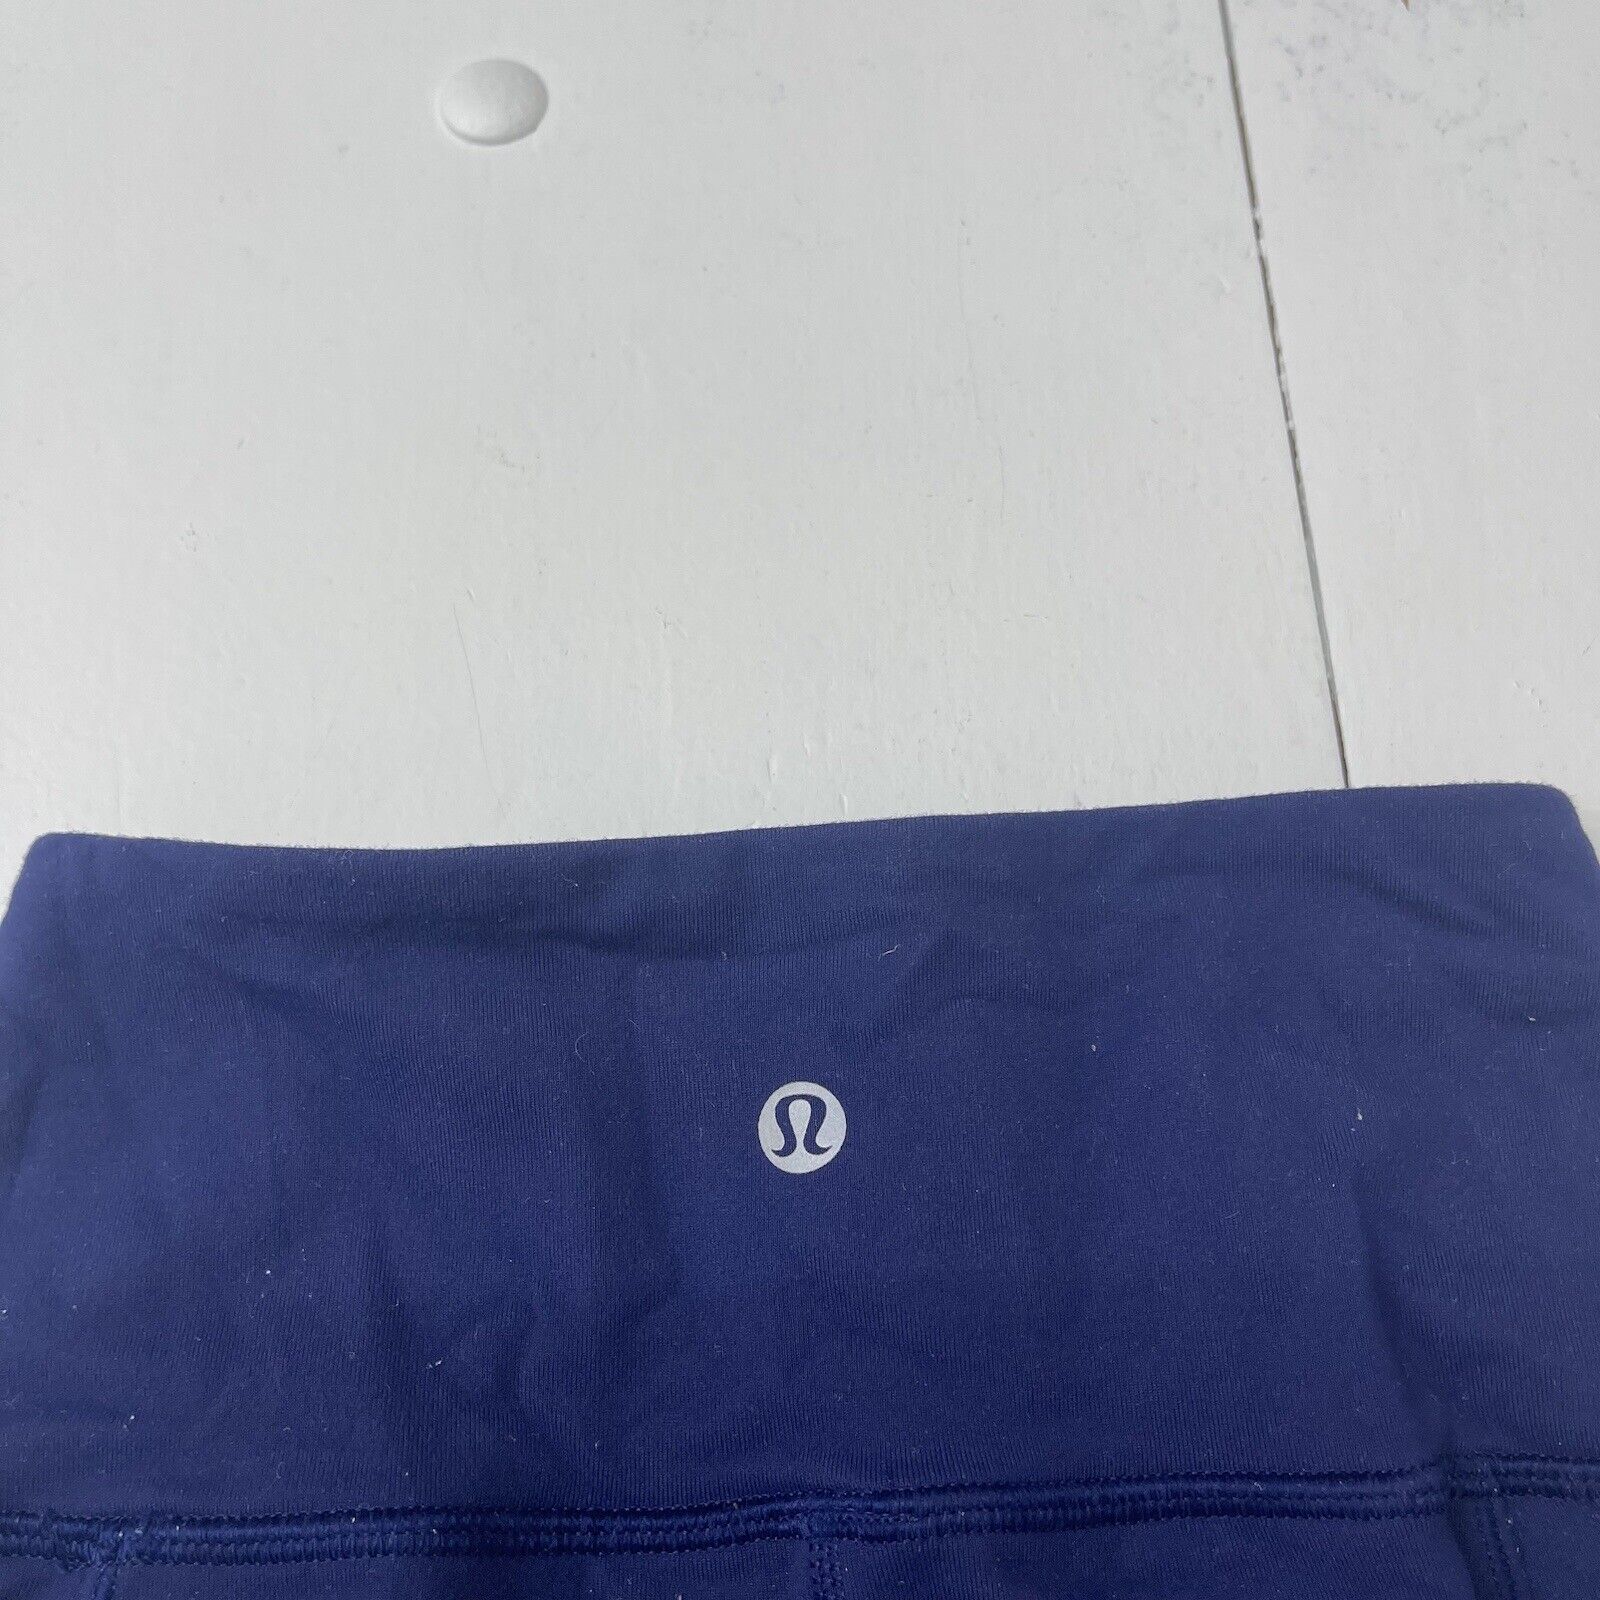 Lululemon Fit Physique Tights Full-Length Side Pocket Double Mesh